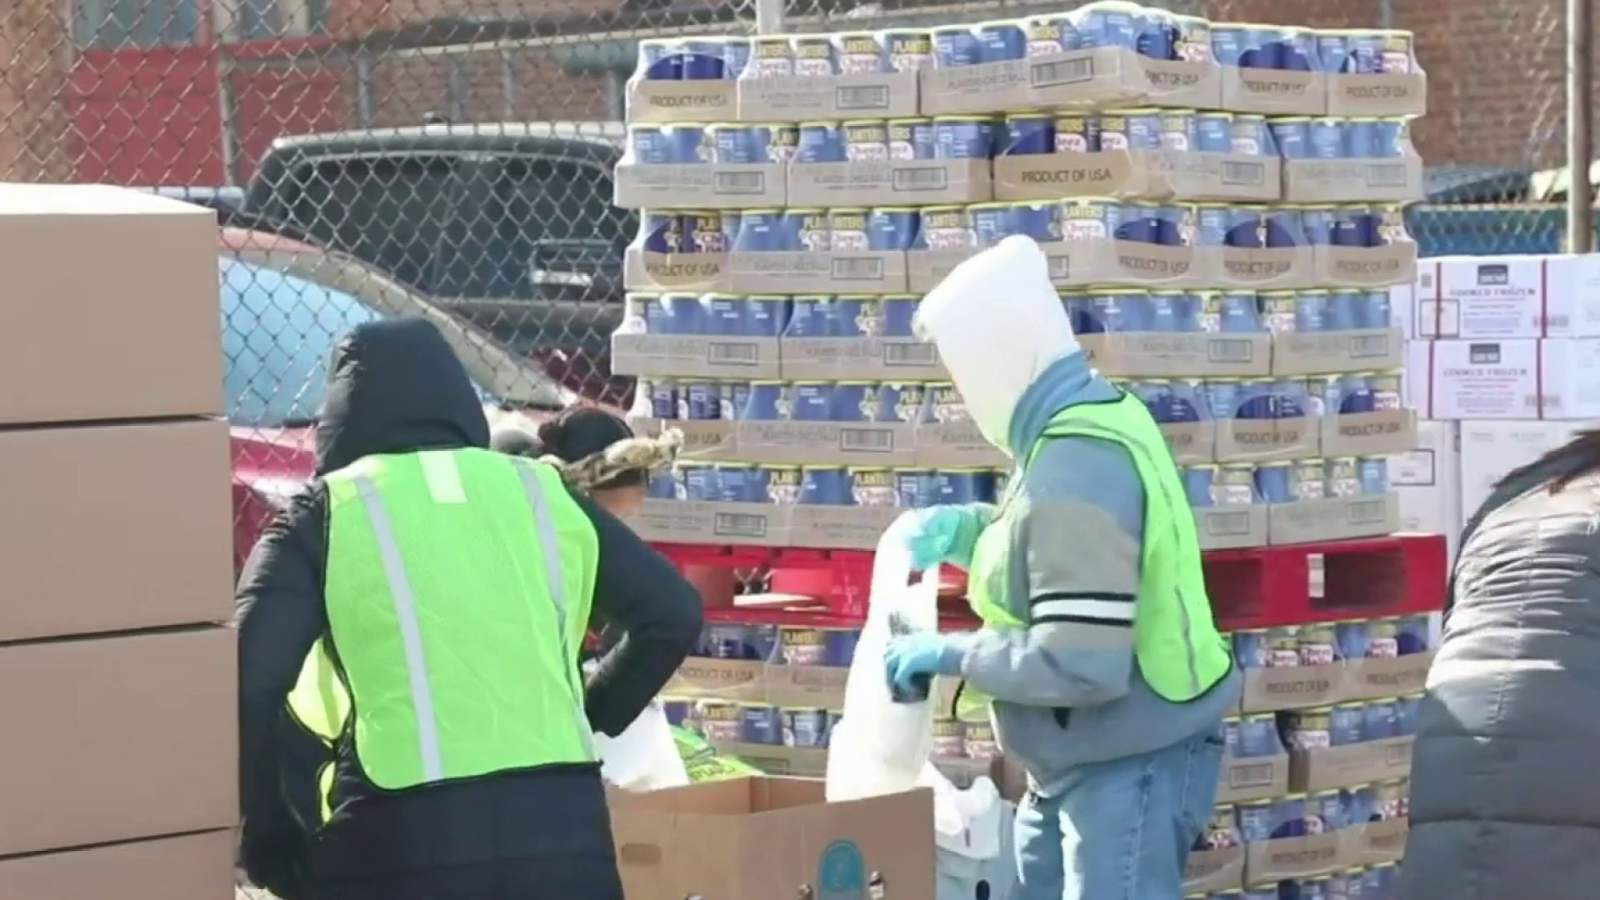 Fiat Chrysler employee gives food to 700 familes in need